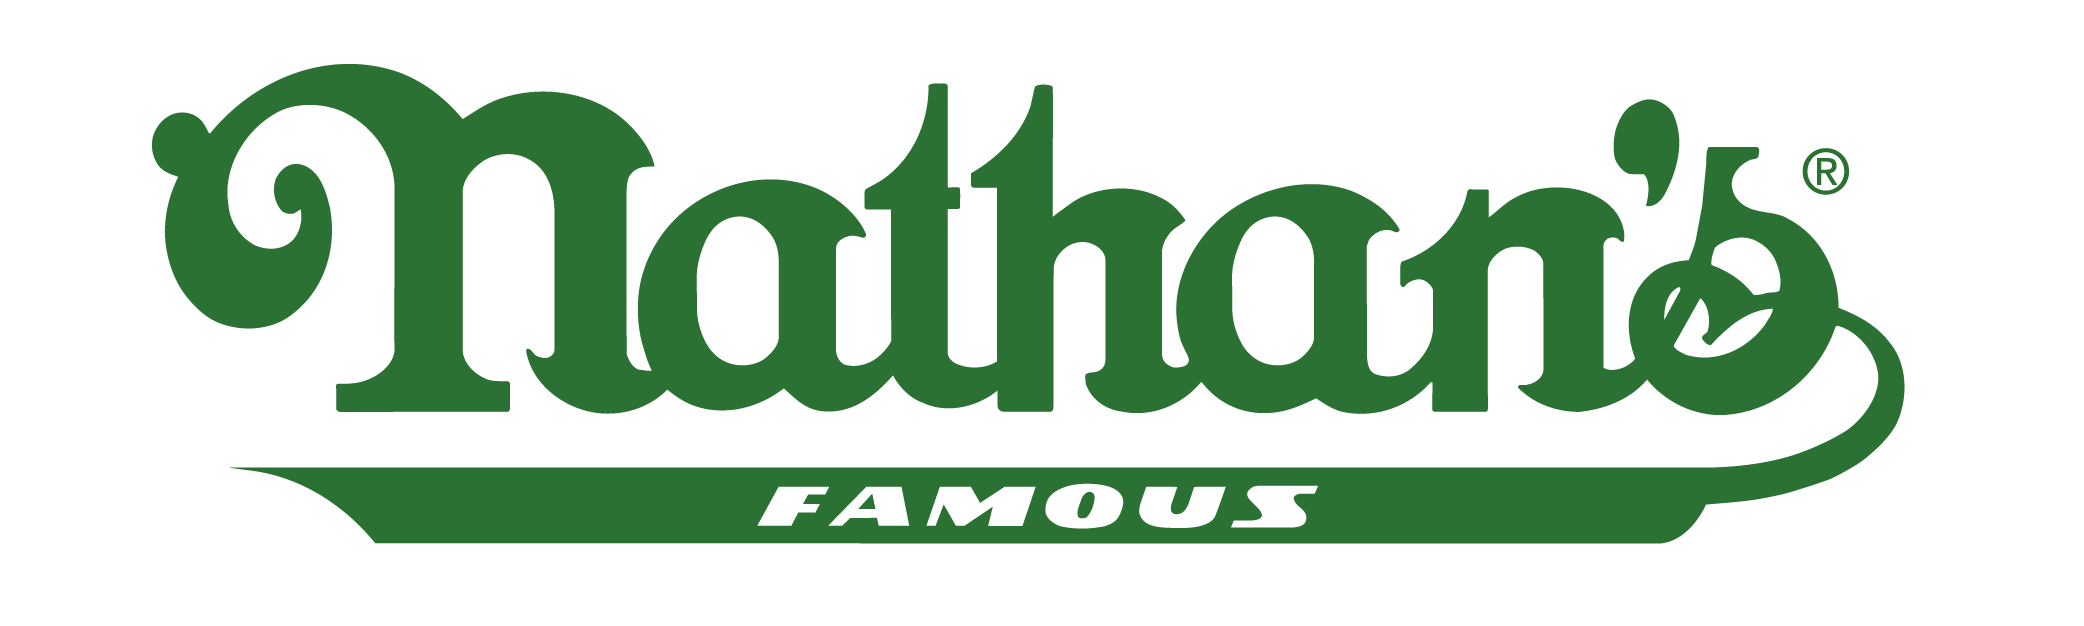 Nathan's Famous Franchise